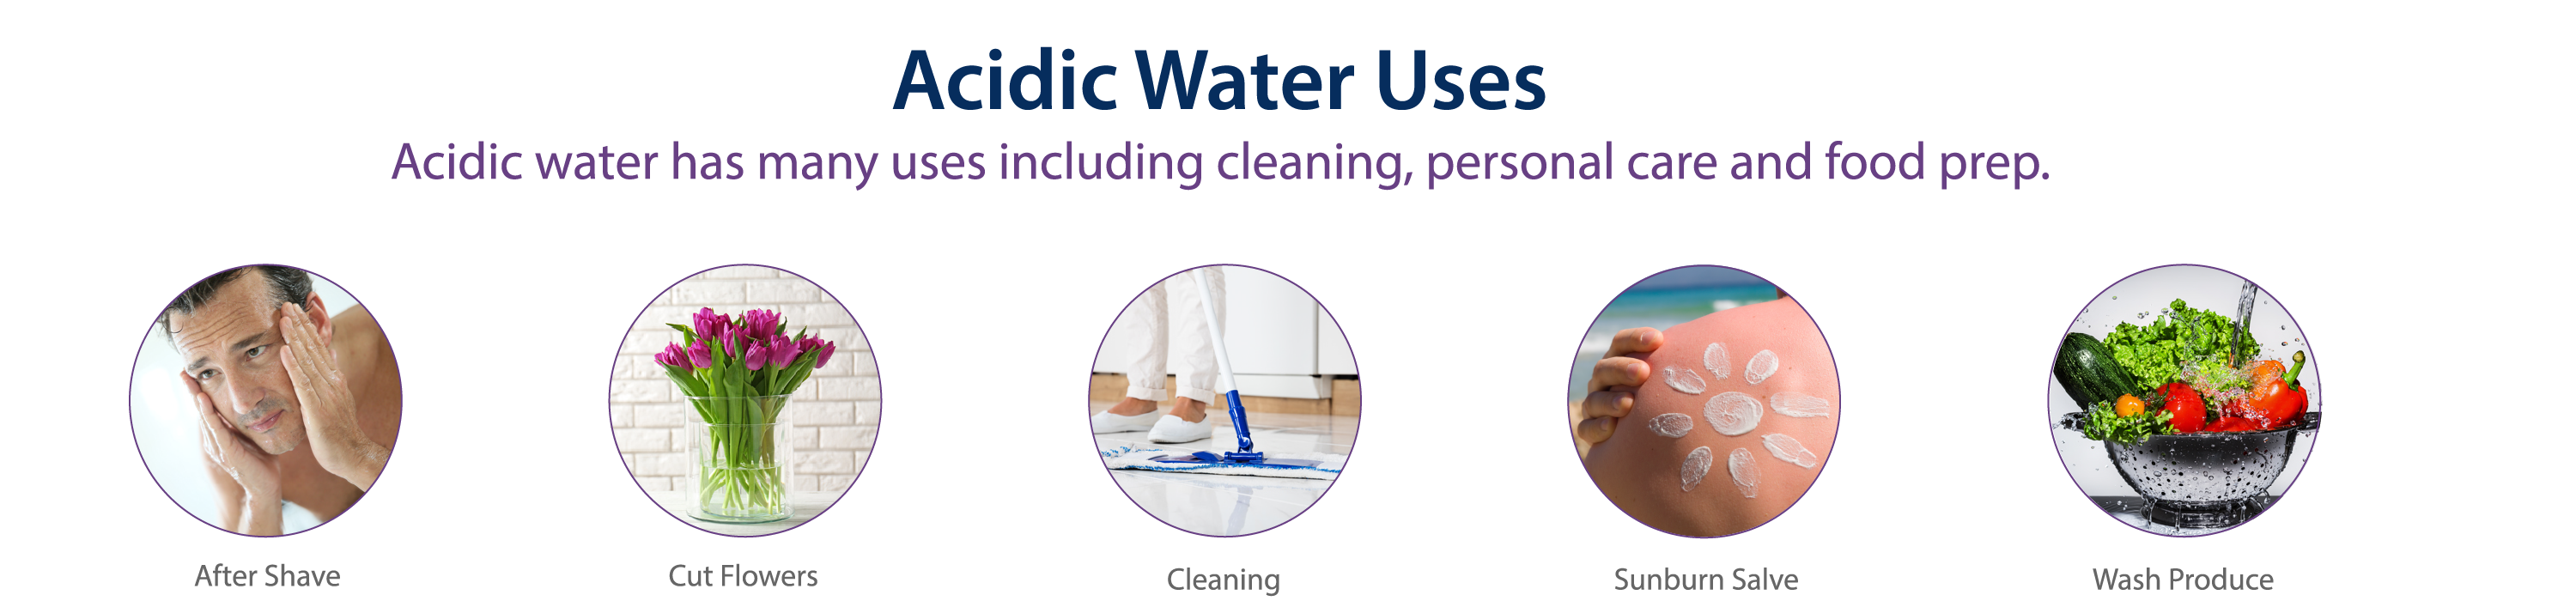 uses for acid water